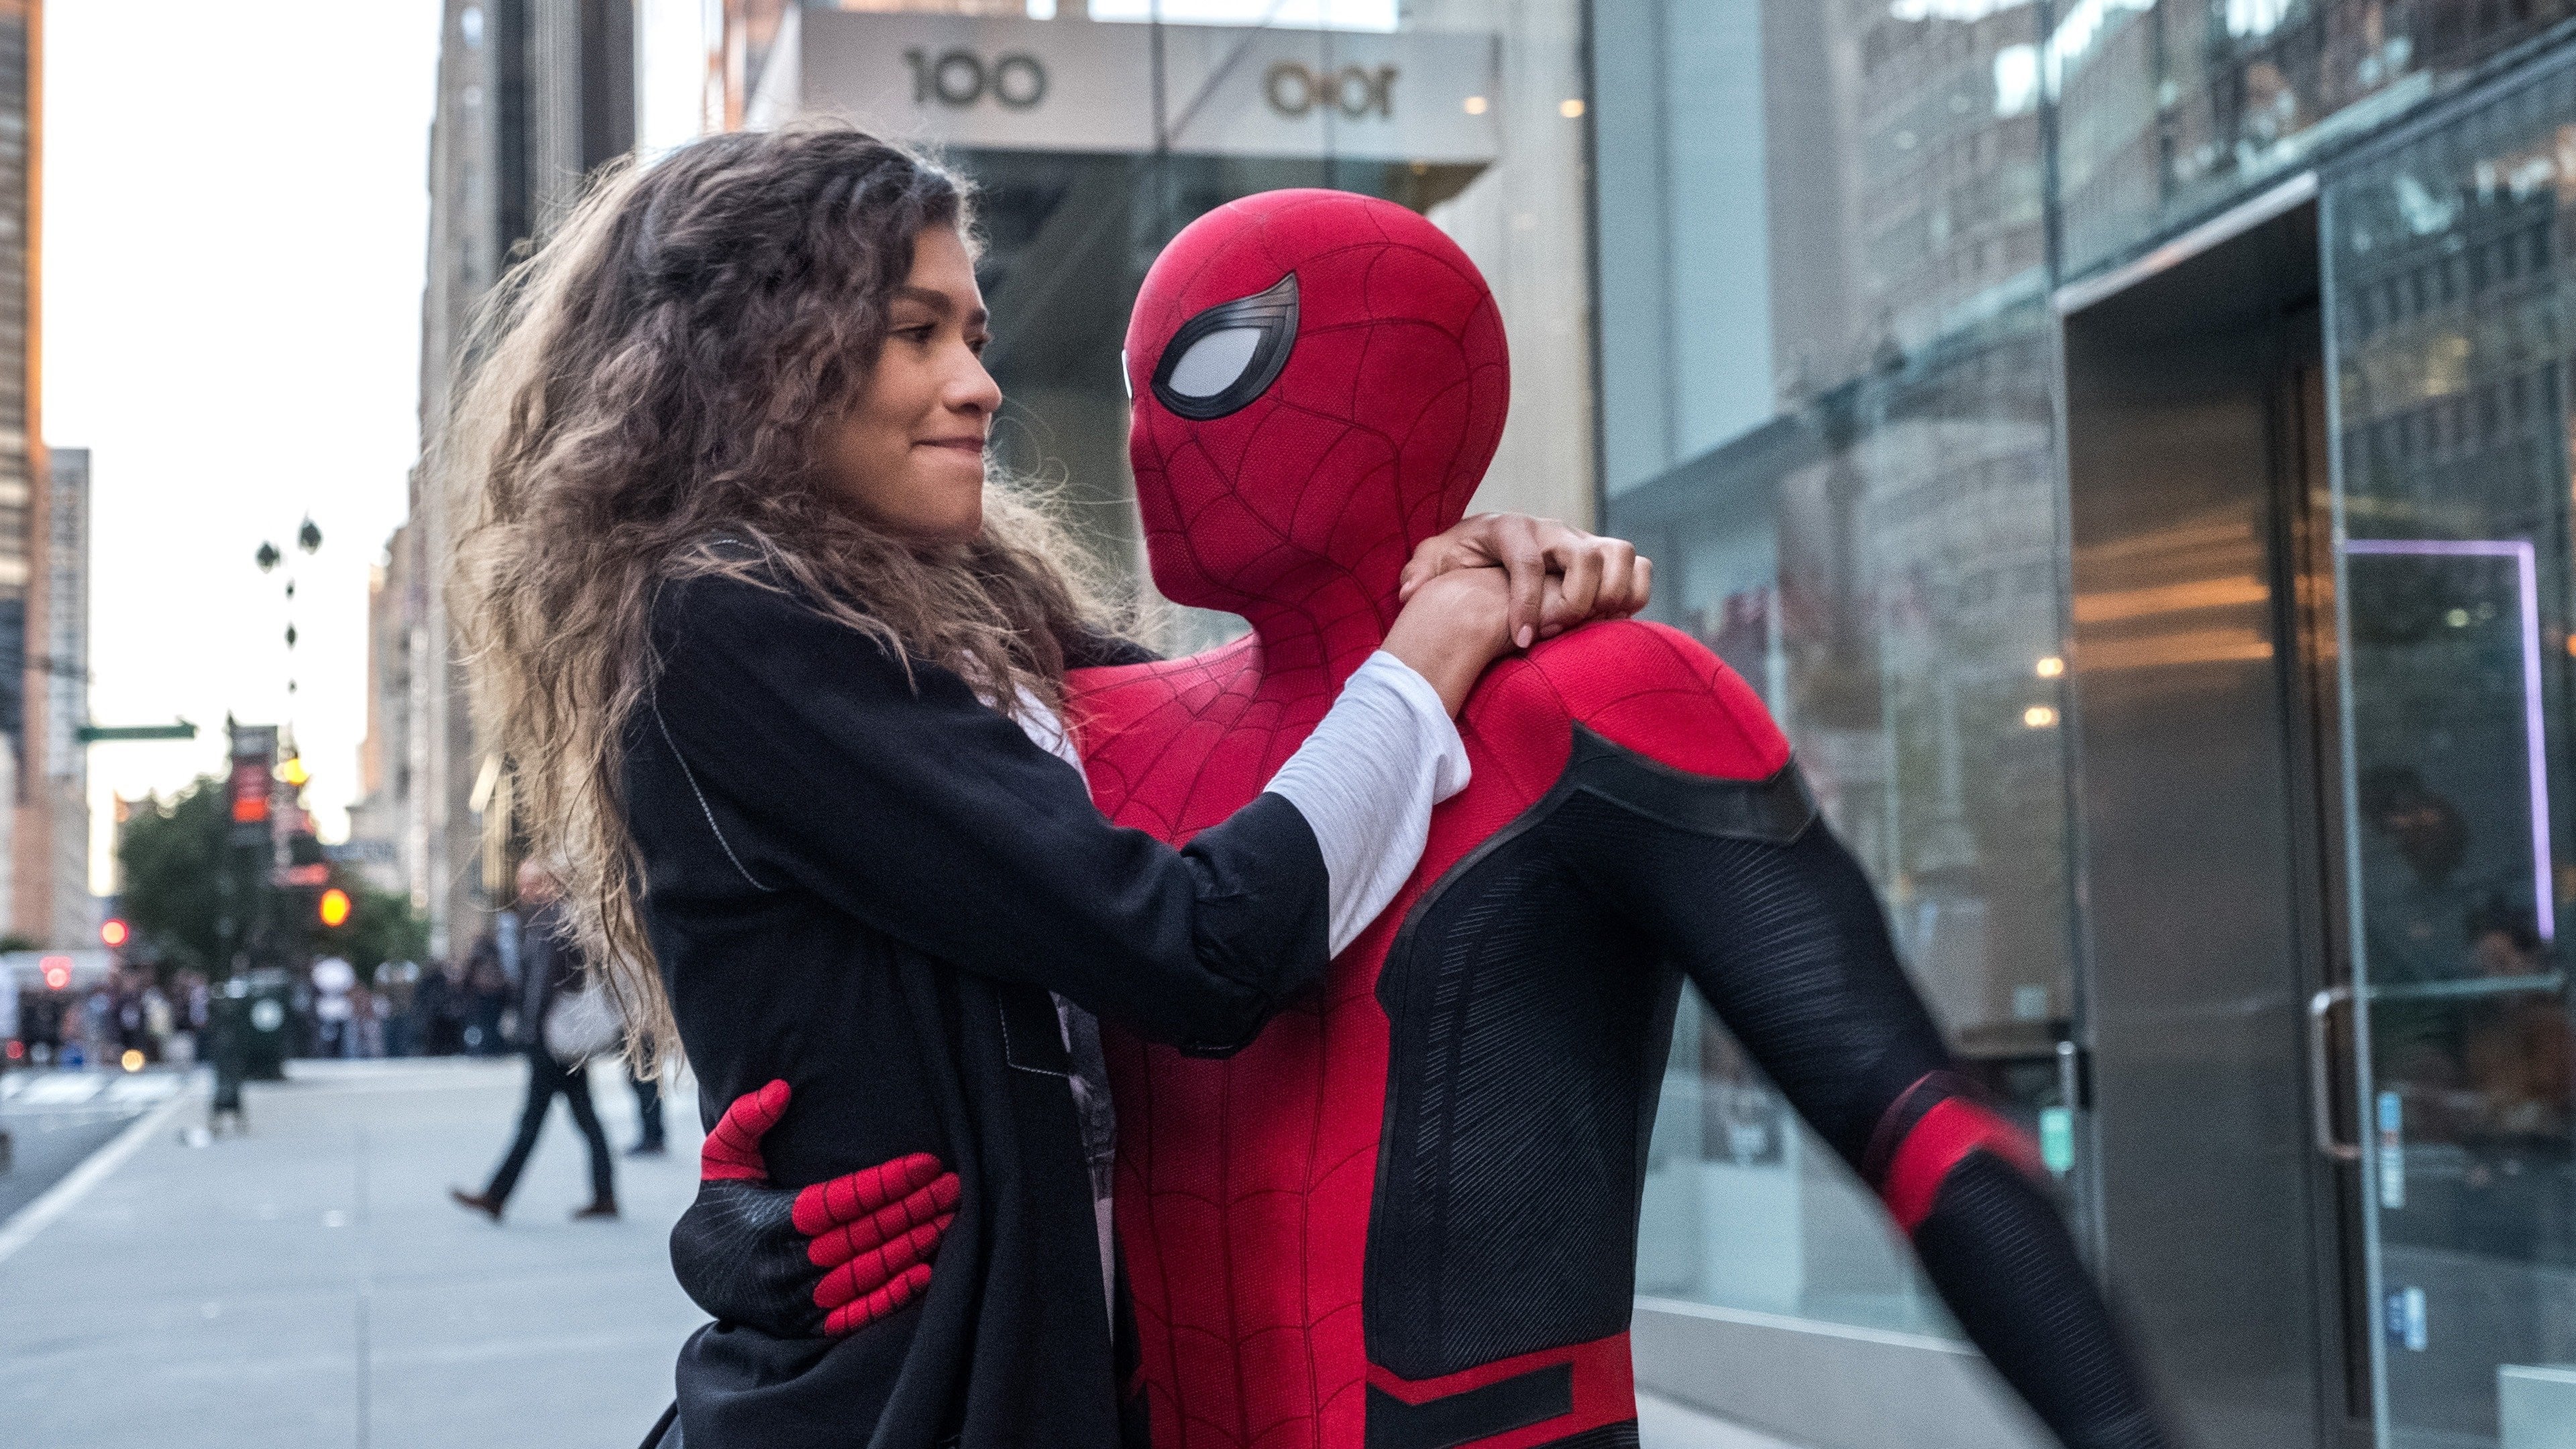 Spider-Man: Far from Home 2019 123movies